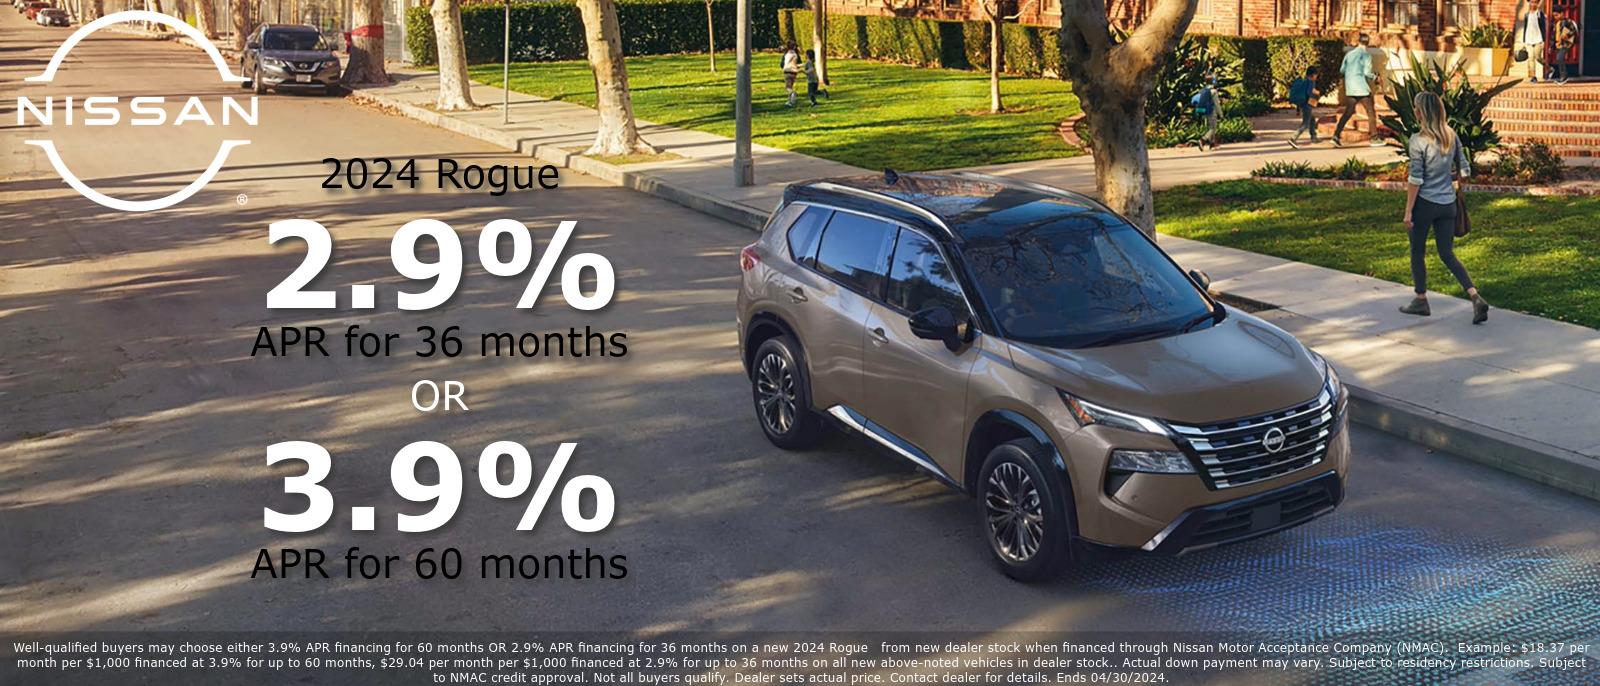 2024 Rogue, 2.9% APR for 36 months or 3.9% APR for 60 months